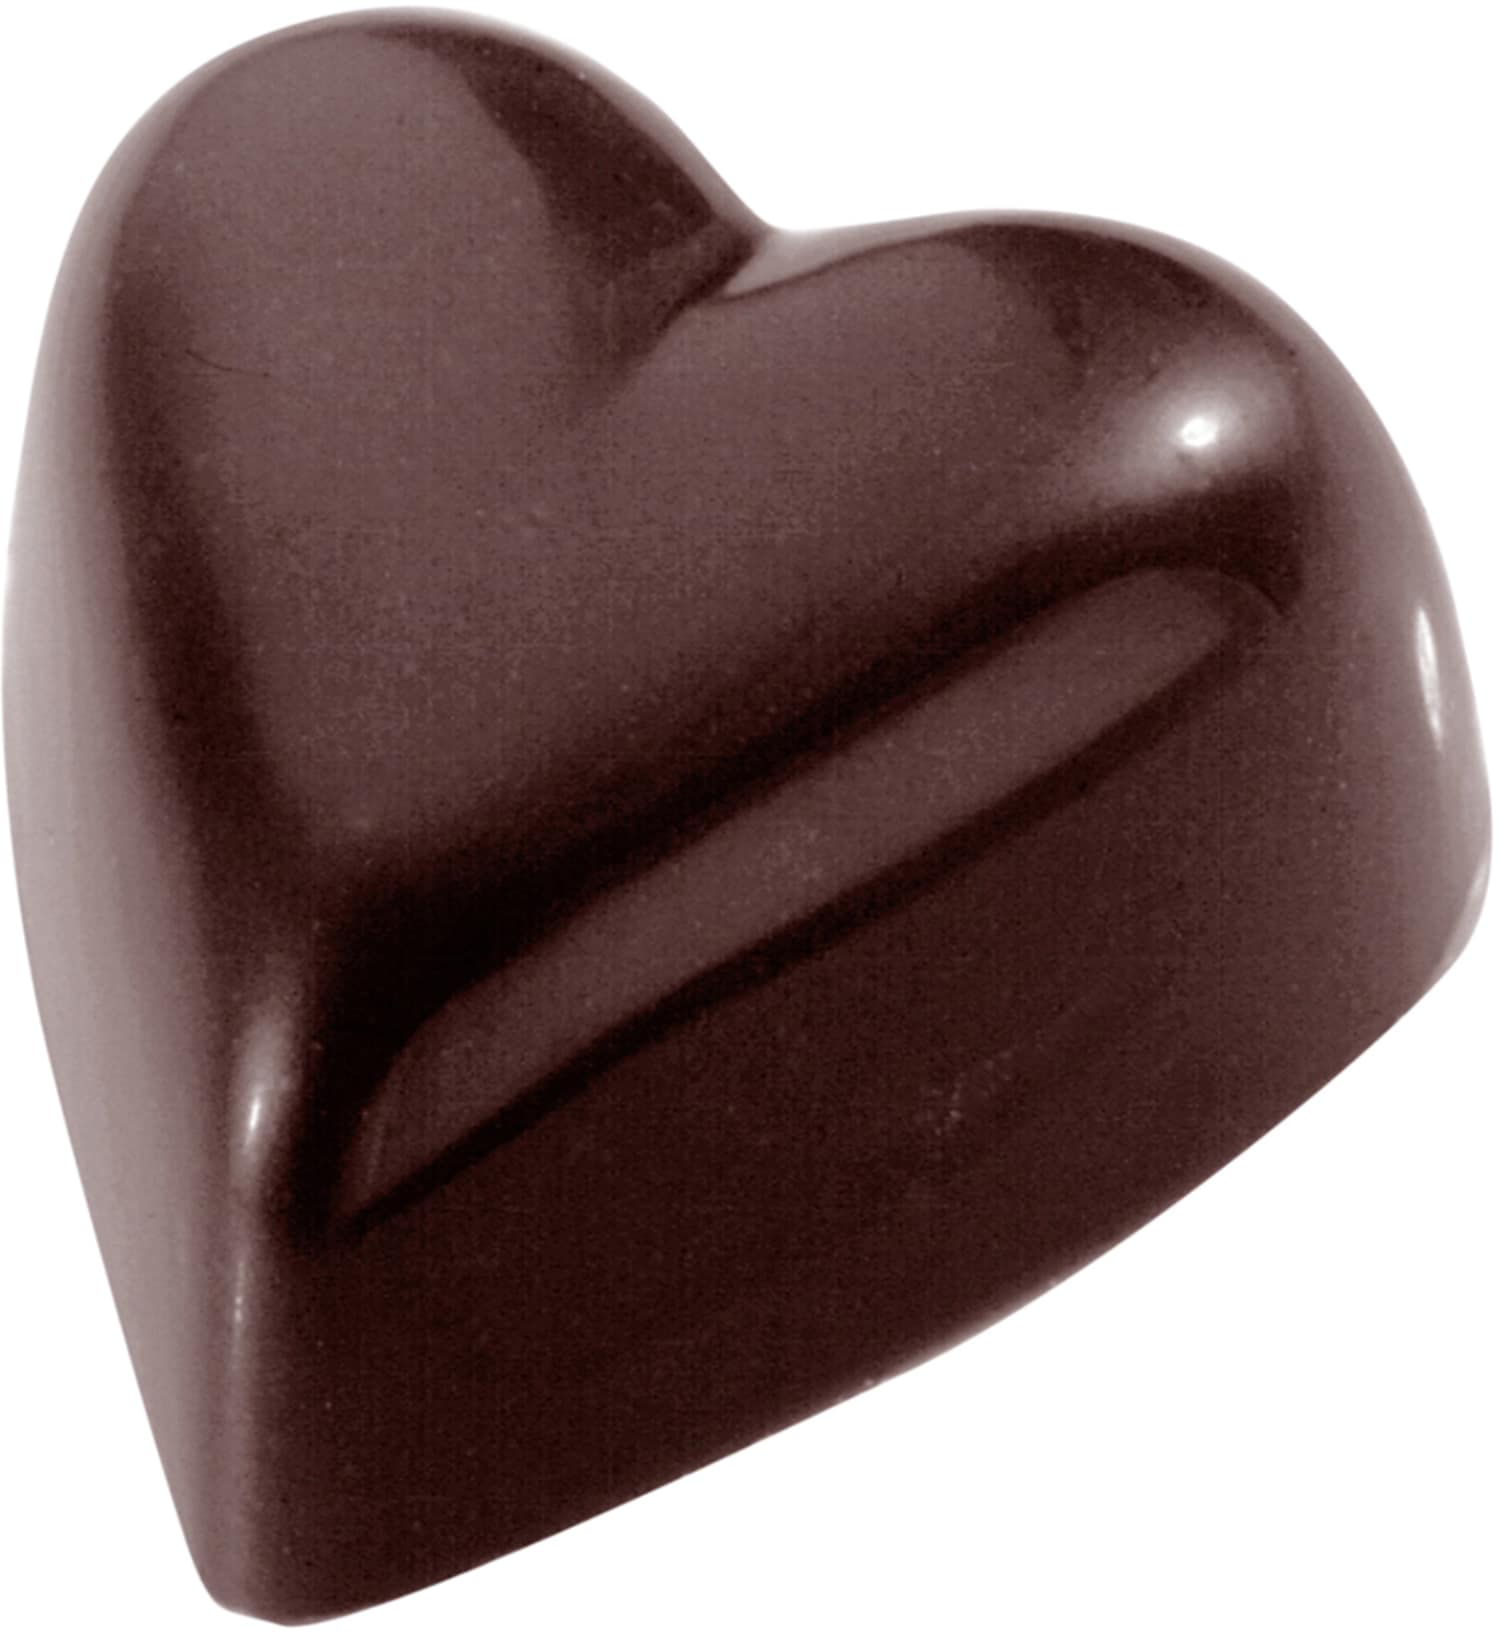 Chocolate mould " heart" 421417 421417